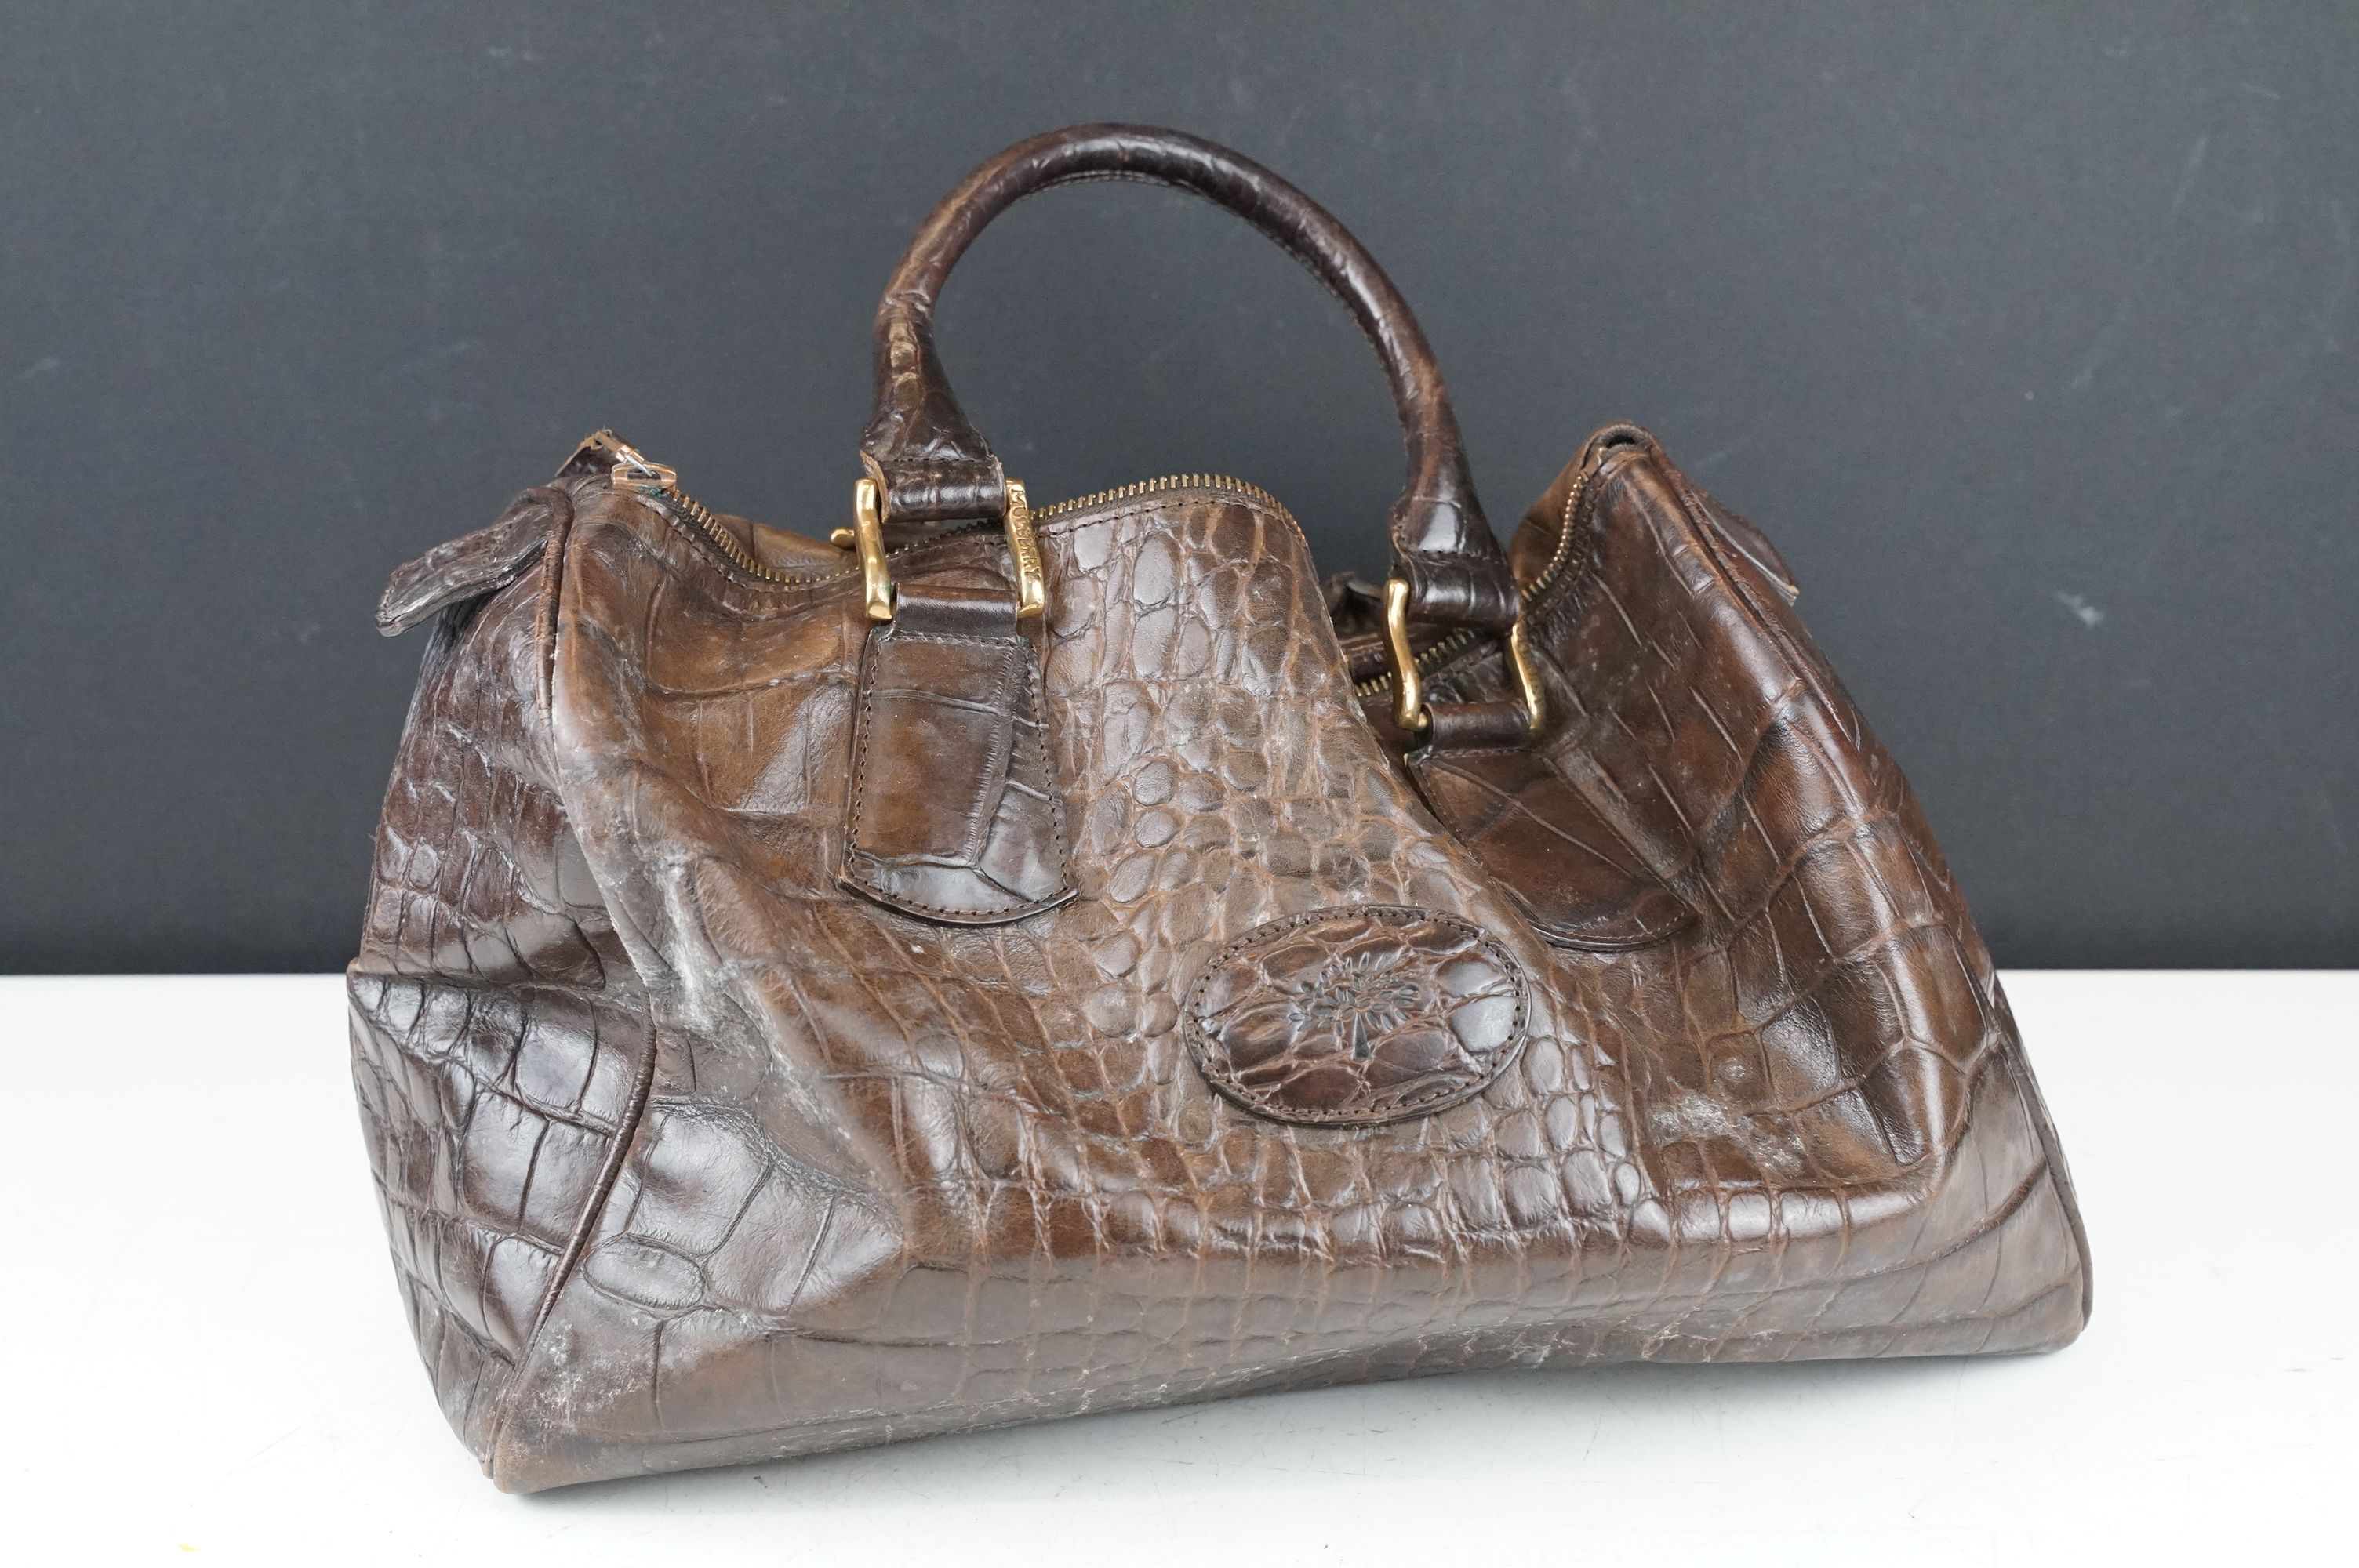 Mulberry dark brown leather crocodile effect handbag, with Mulberry storage bag, 20cm high x 35cm - Image 2 of 12